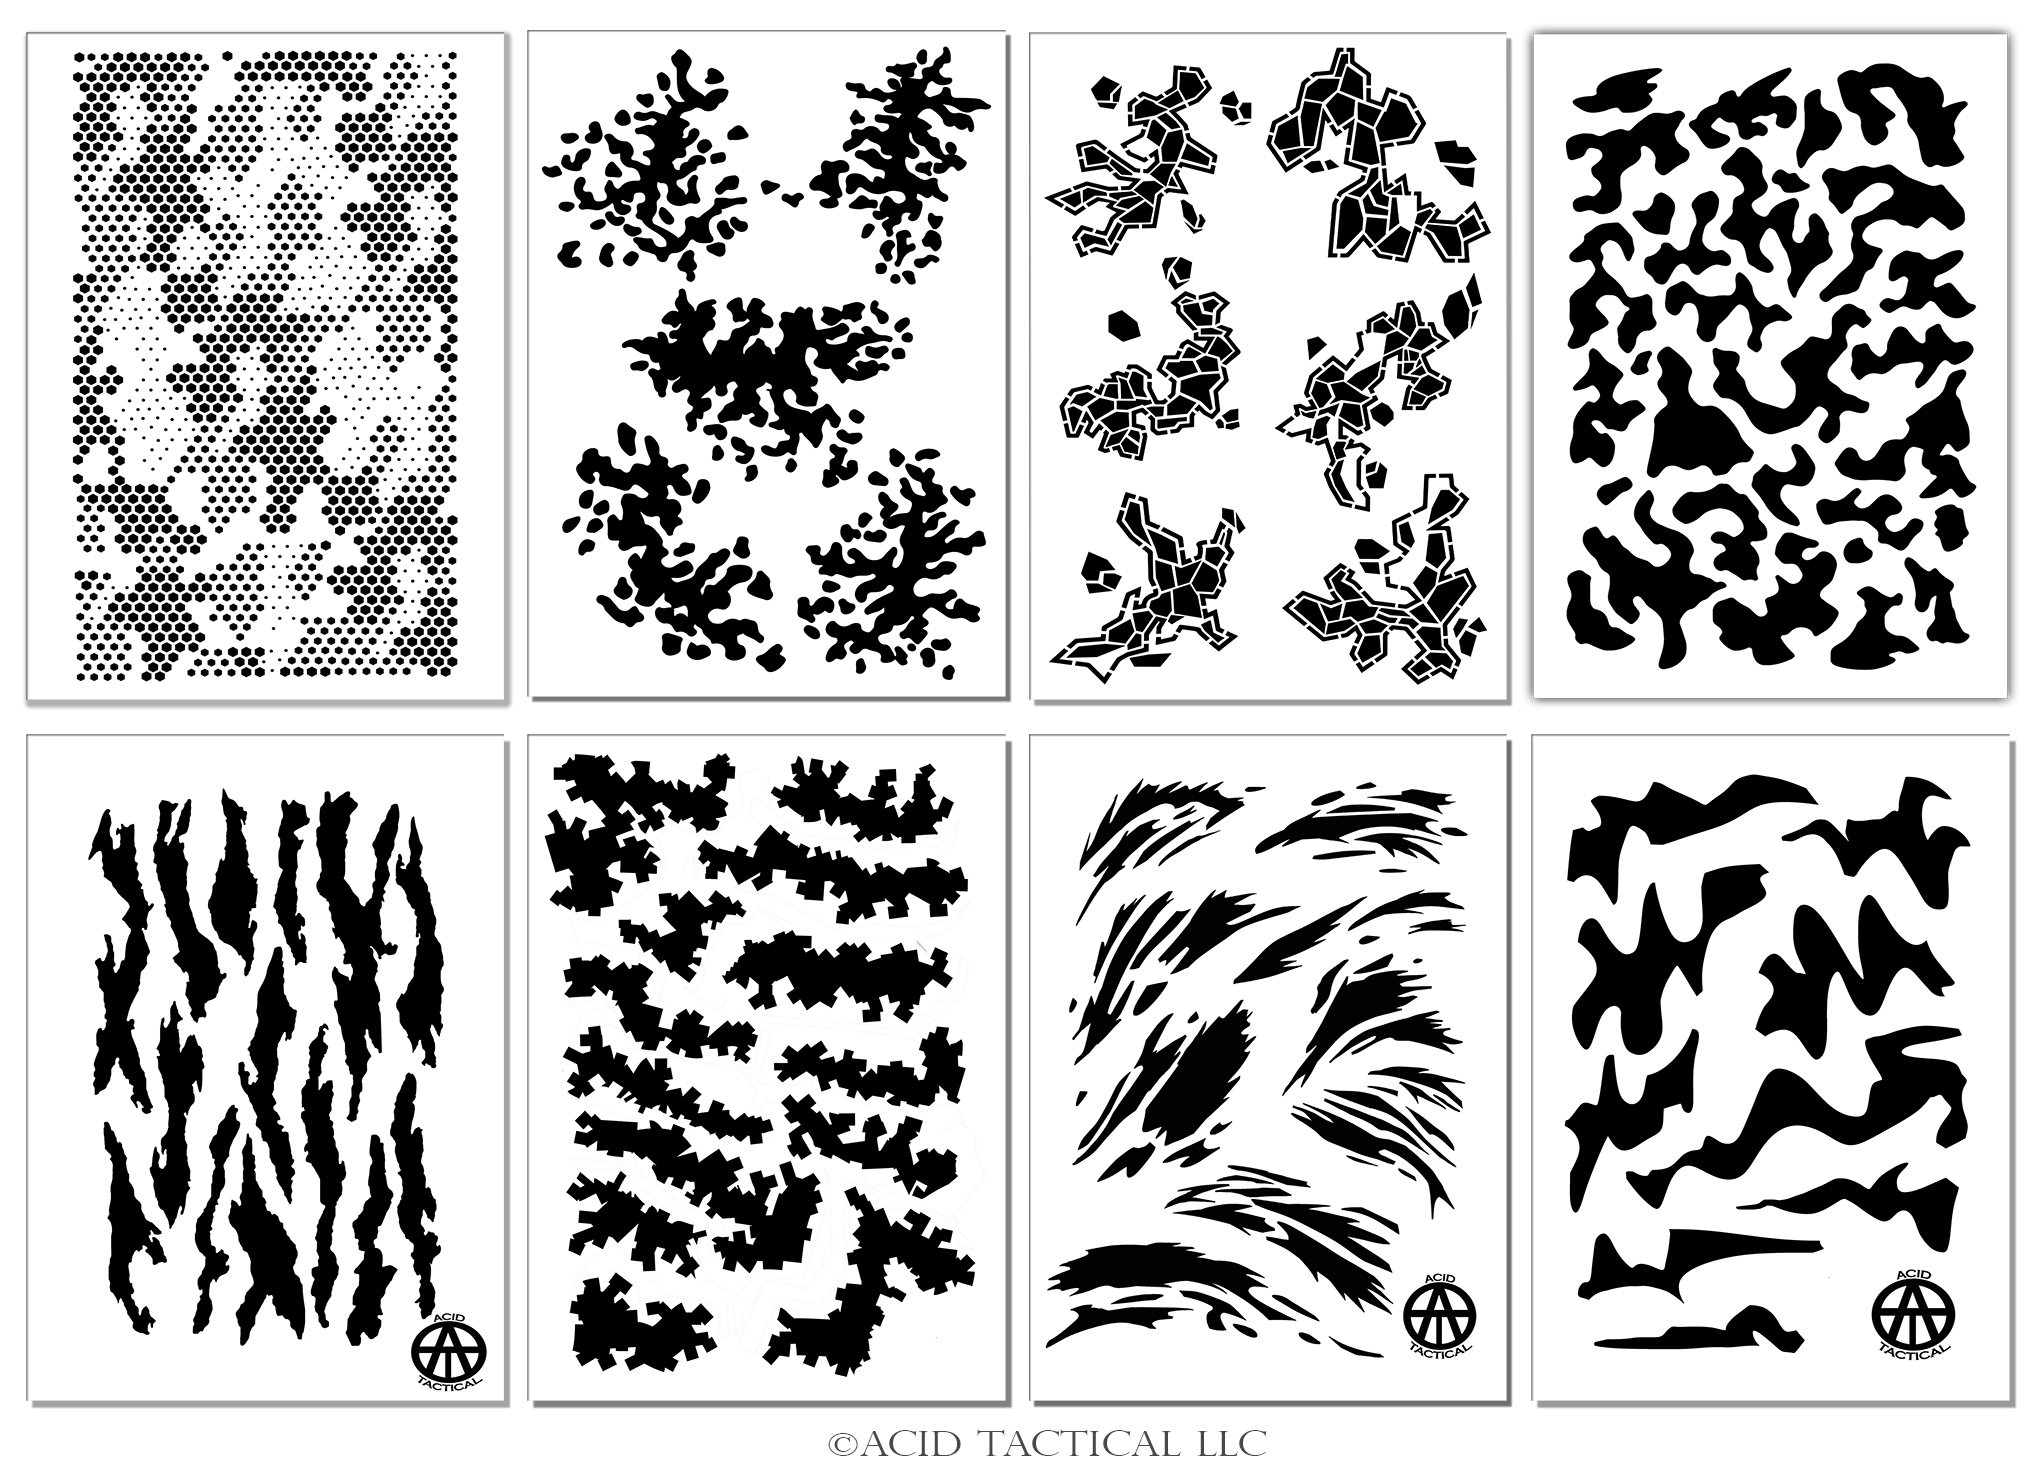 Acid Tactical® 10 Pack 9x14 Camouflage Airbrush Spray Paint Wall